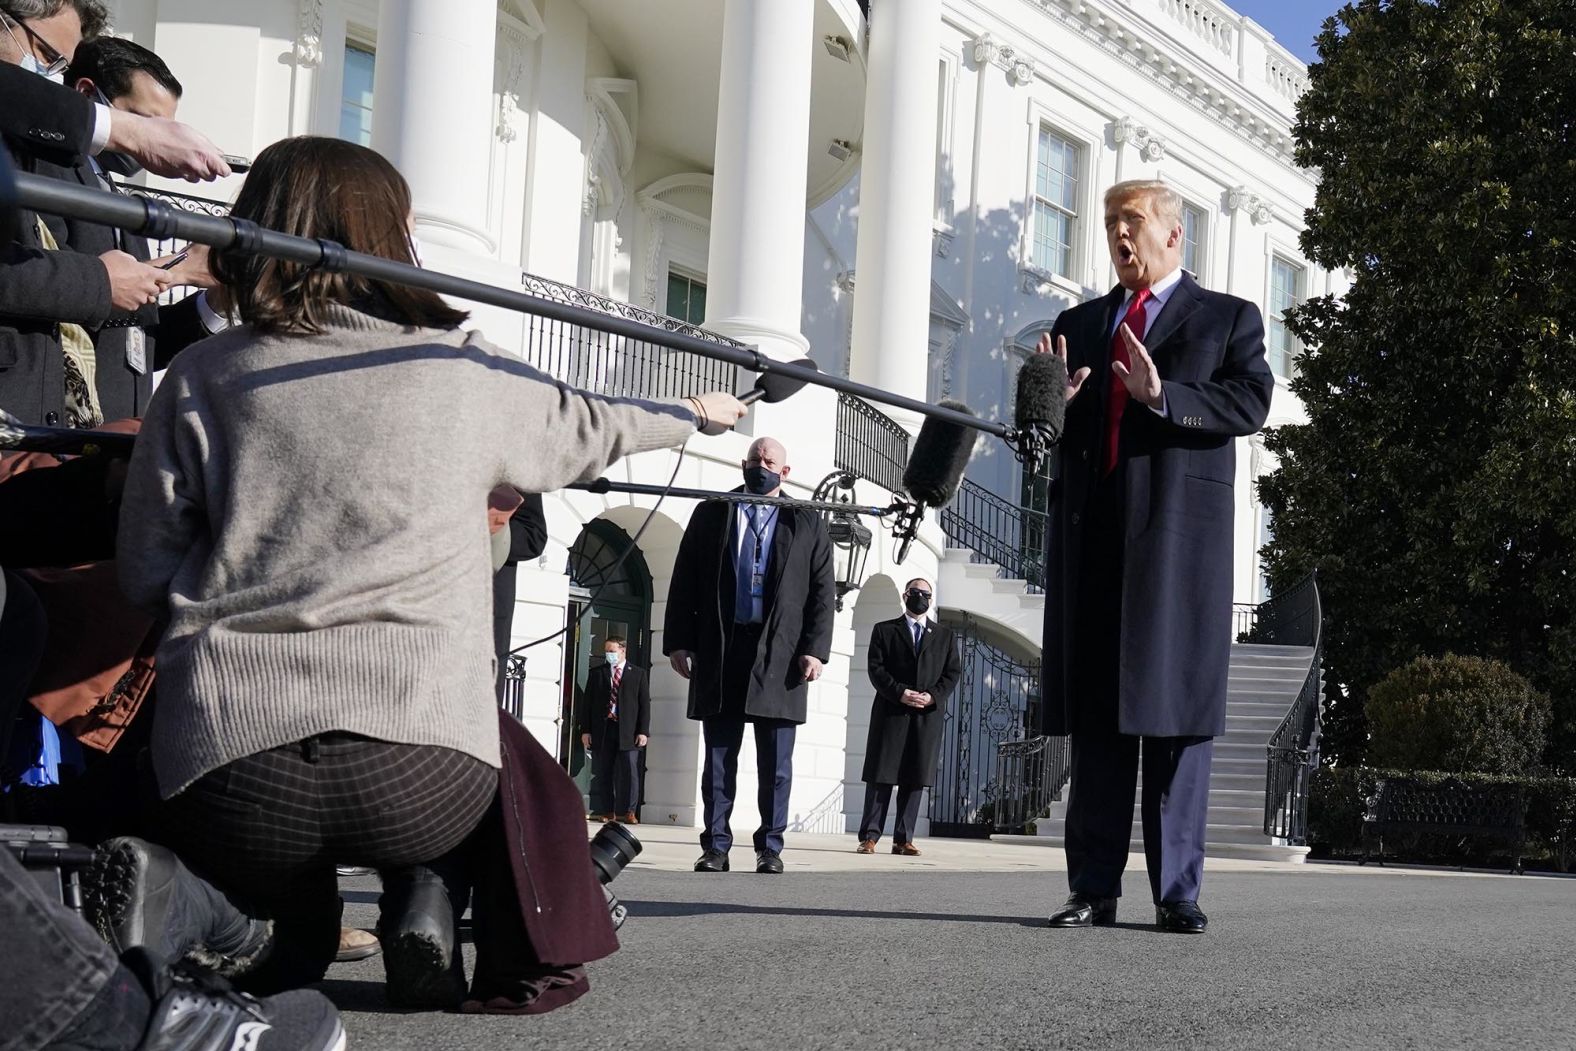 Trump talks to the media at the White House one day before <a href="index.php?page=&url=http%3A%2F%2Fwww.cnn.com%2F2021%2F01%2F13%2Fpolitics%2Fgallery%2Ftrump-second-impeachment%2Findex.html" target="_blank">he was impeached for a second time.</a> Ten House Republicans joined House Democrats in voting for impeachment, exactly one week after pro-Trump rioters ransacked the US Capitol. The impeachment resolution charged Trump with "incitement of insurrection." <a href="index.php?page=&url=https%3A%2F%2Fwww.cnn.com%2F2021%2F01%2F12%2Fpolitics%2Fdonald-trump-riot-impeachment%2Findex.html" target="_blank">Trump likened the impeachment push to a "witch hunt."</a> He said the speech he gave to his supporters on January 6, the day the Capitol was breached, was "totally appropriate." He was acquitted on February 12, 2021.